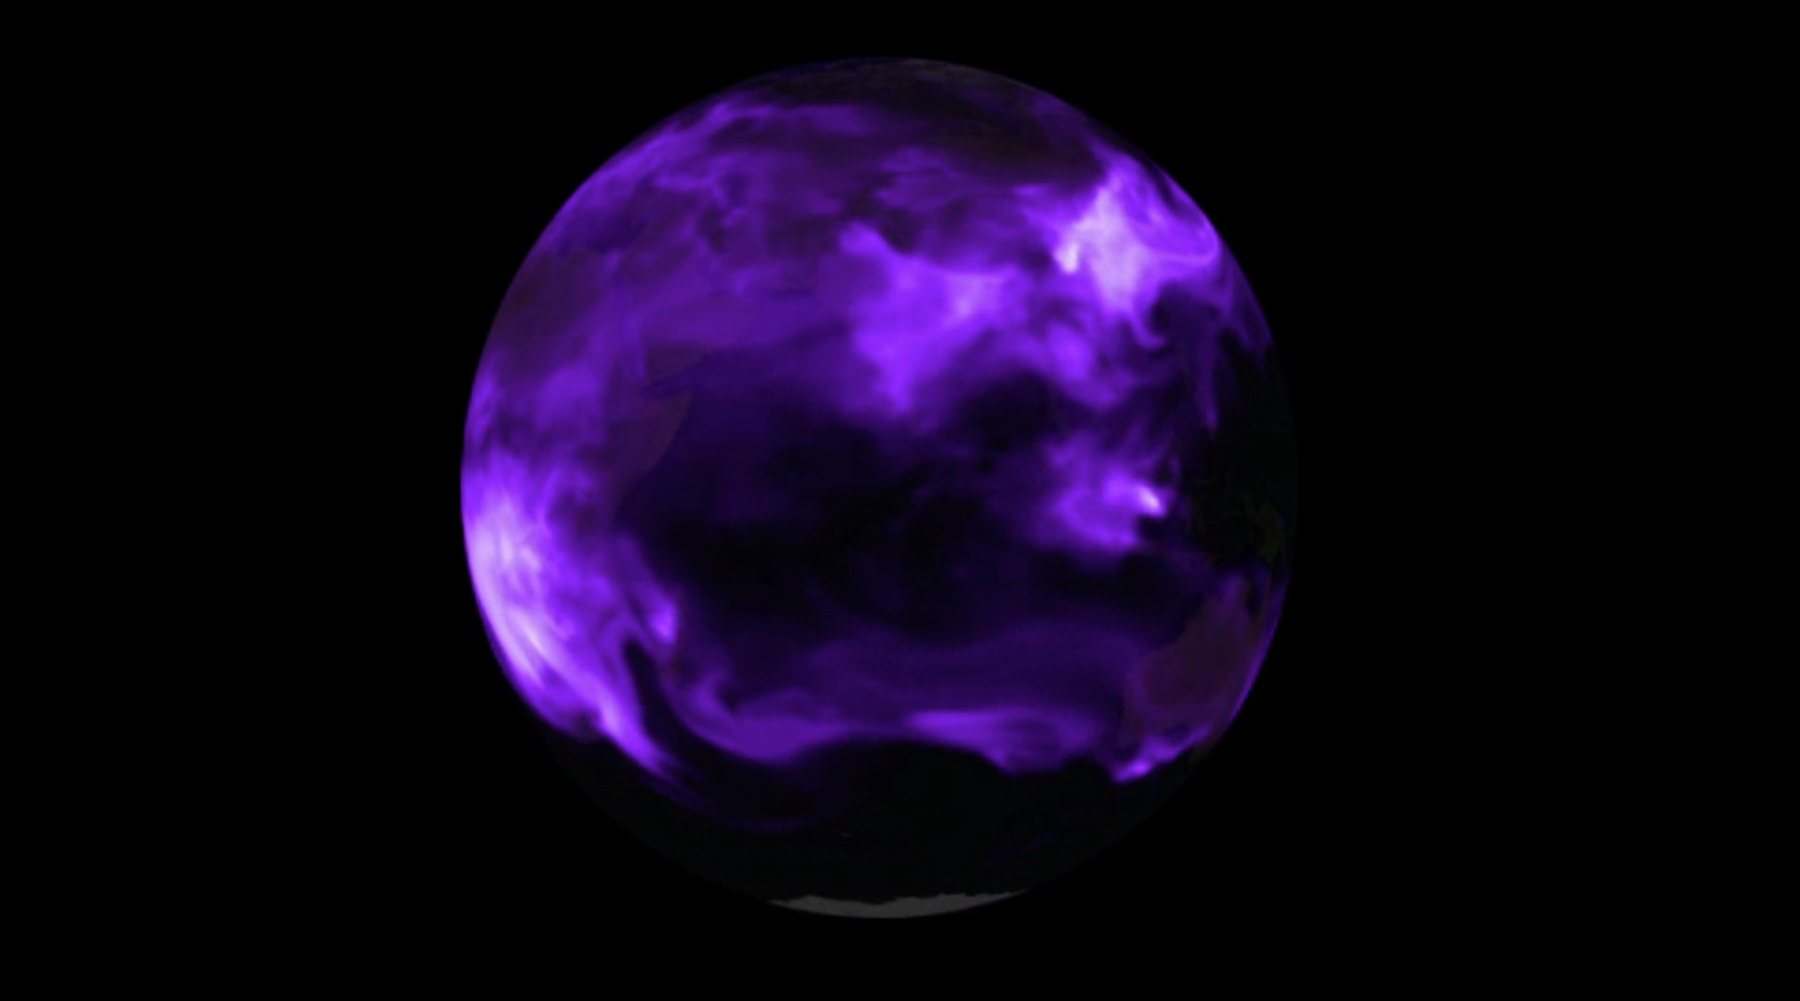 An image of a globe glowing purple in front of a black background